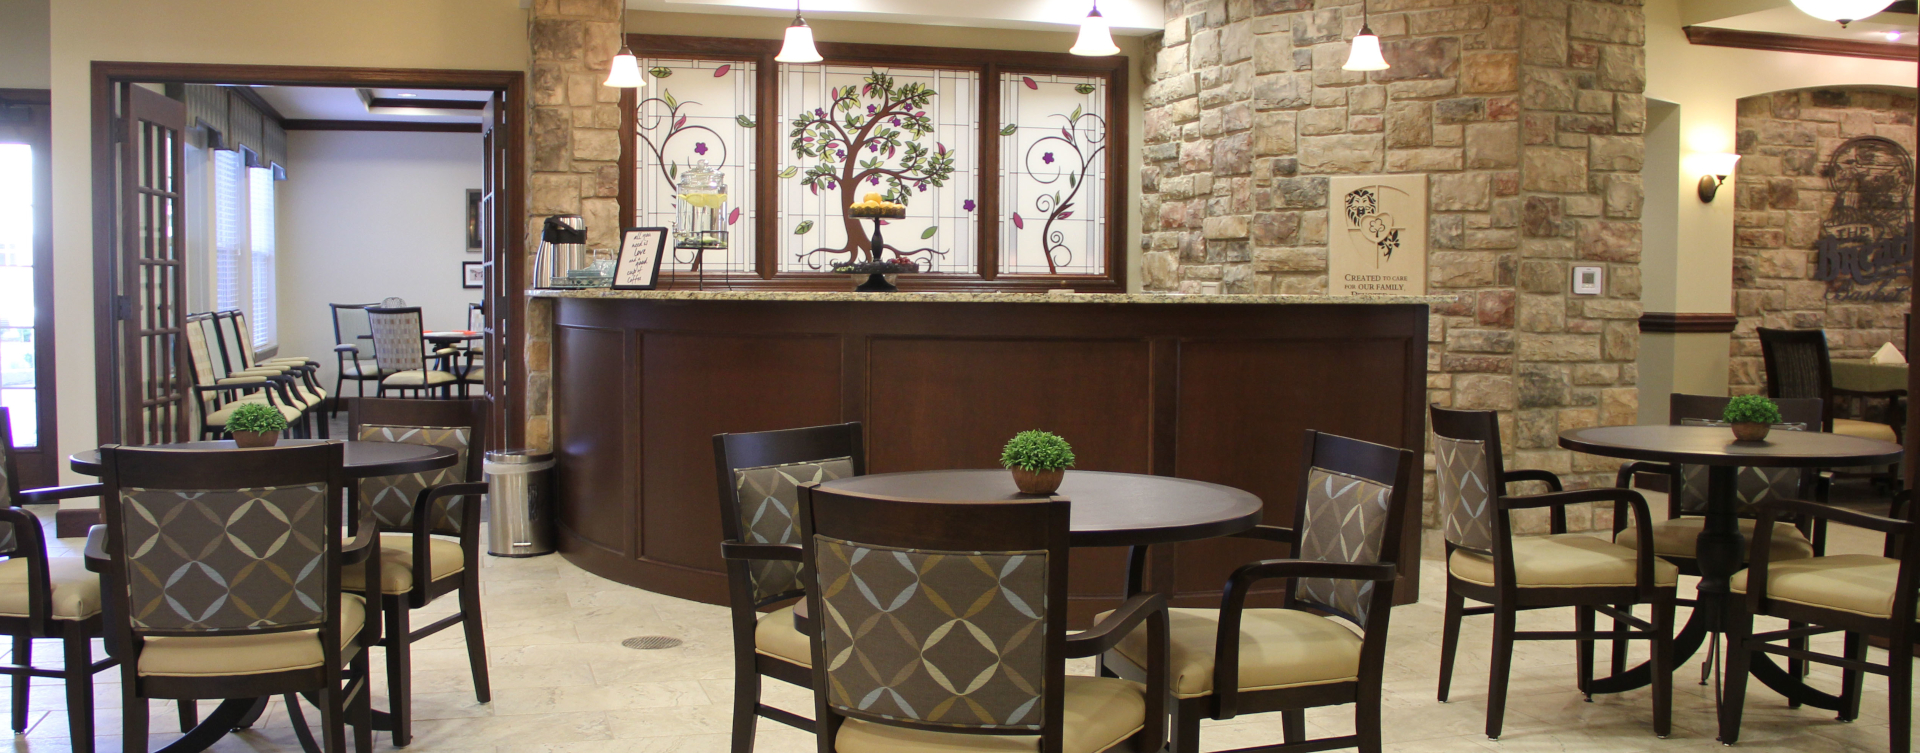 Intimate enough to entertain your closest family; you can even host your next get together in the bistro at Bickford of Tinley Park